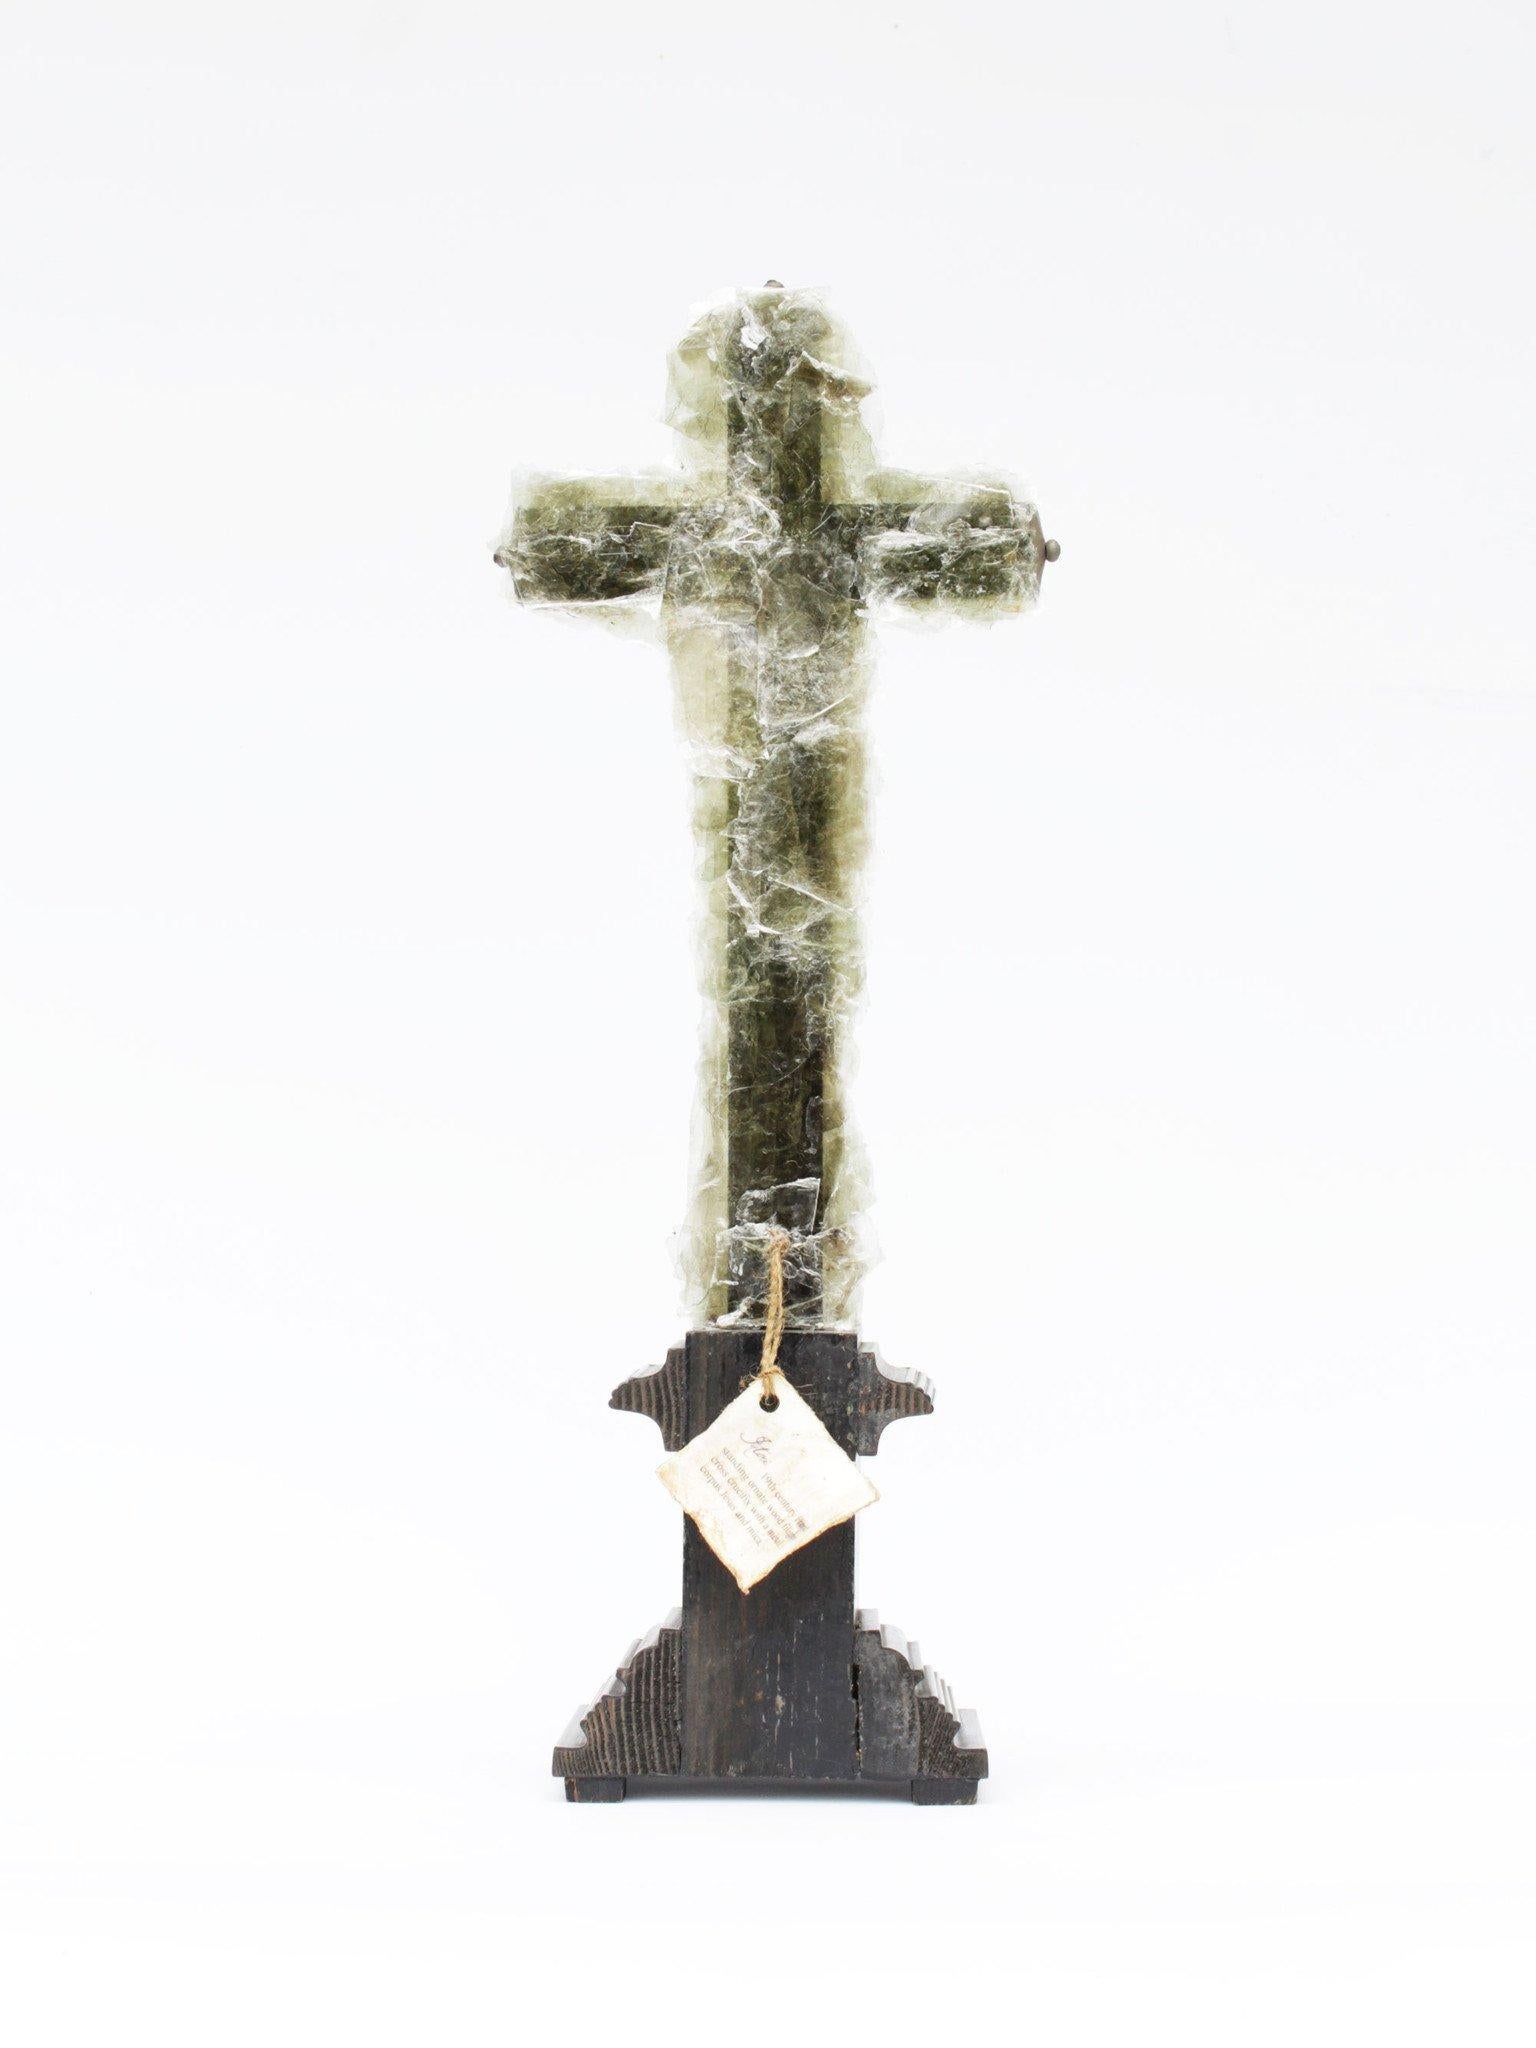 19th century French marbleized painted crucifix with green mica. 

The crucifix originally came from a collector in France. The crucifix is painted black with green marbleized details on the base. The figure of Christ is silver along with other